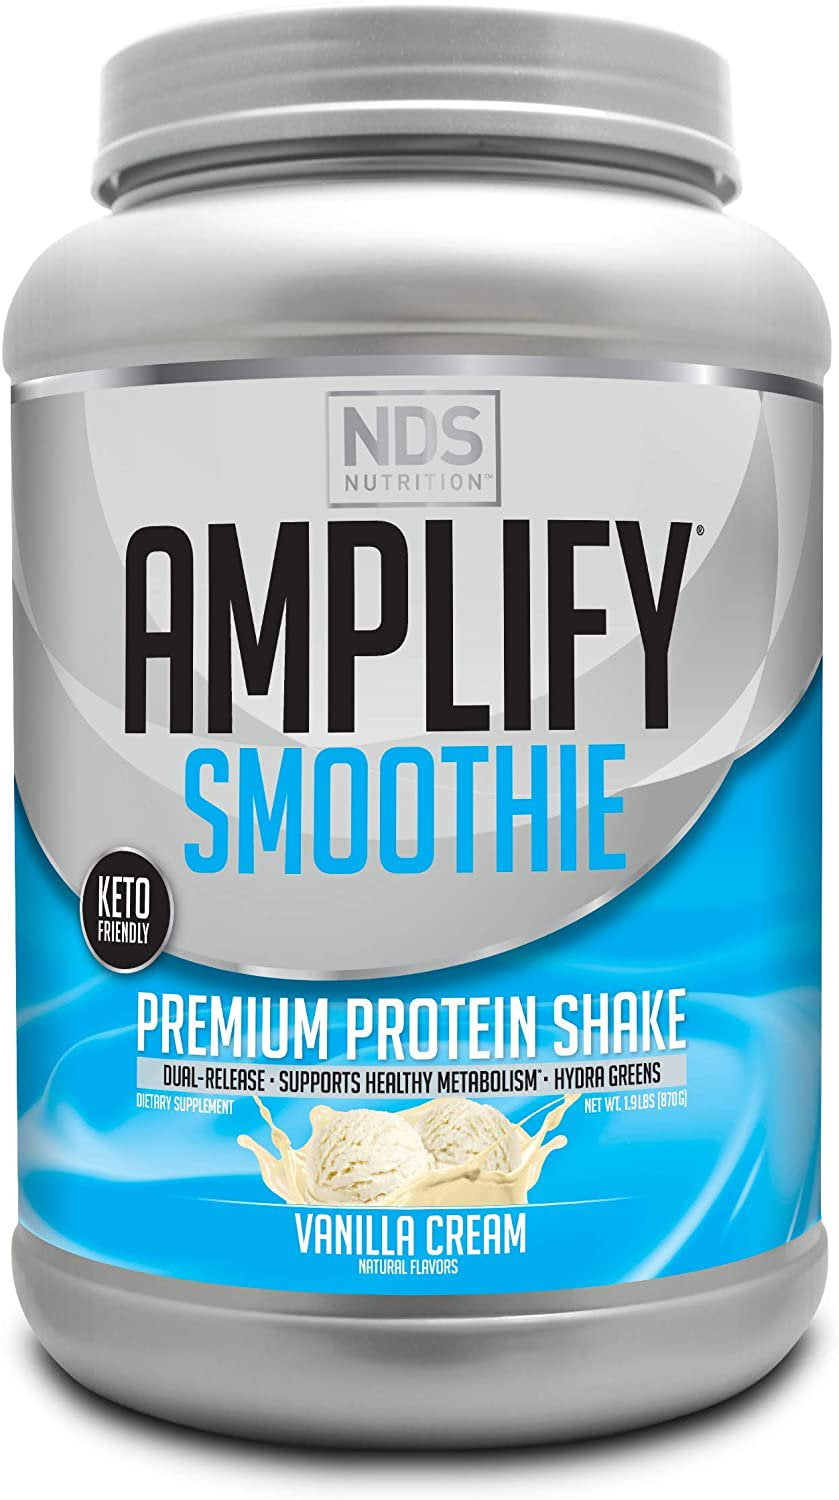 Nutrition Amplify Smoothie Premium Whey Protein Powder Shake with Added Greens and Amino Acids - Build Lean Muscle, Gain Strength, Lasting Energy, and Lose Fat - Vanilla (30 Servings)